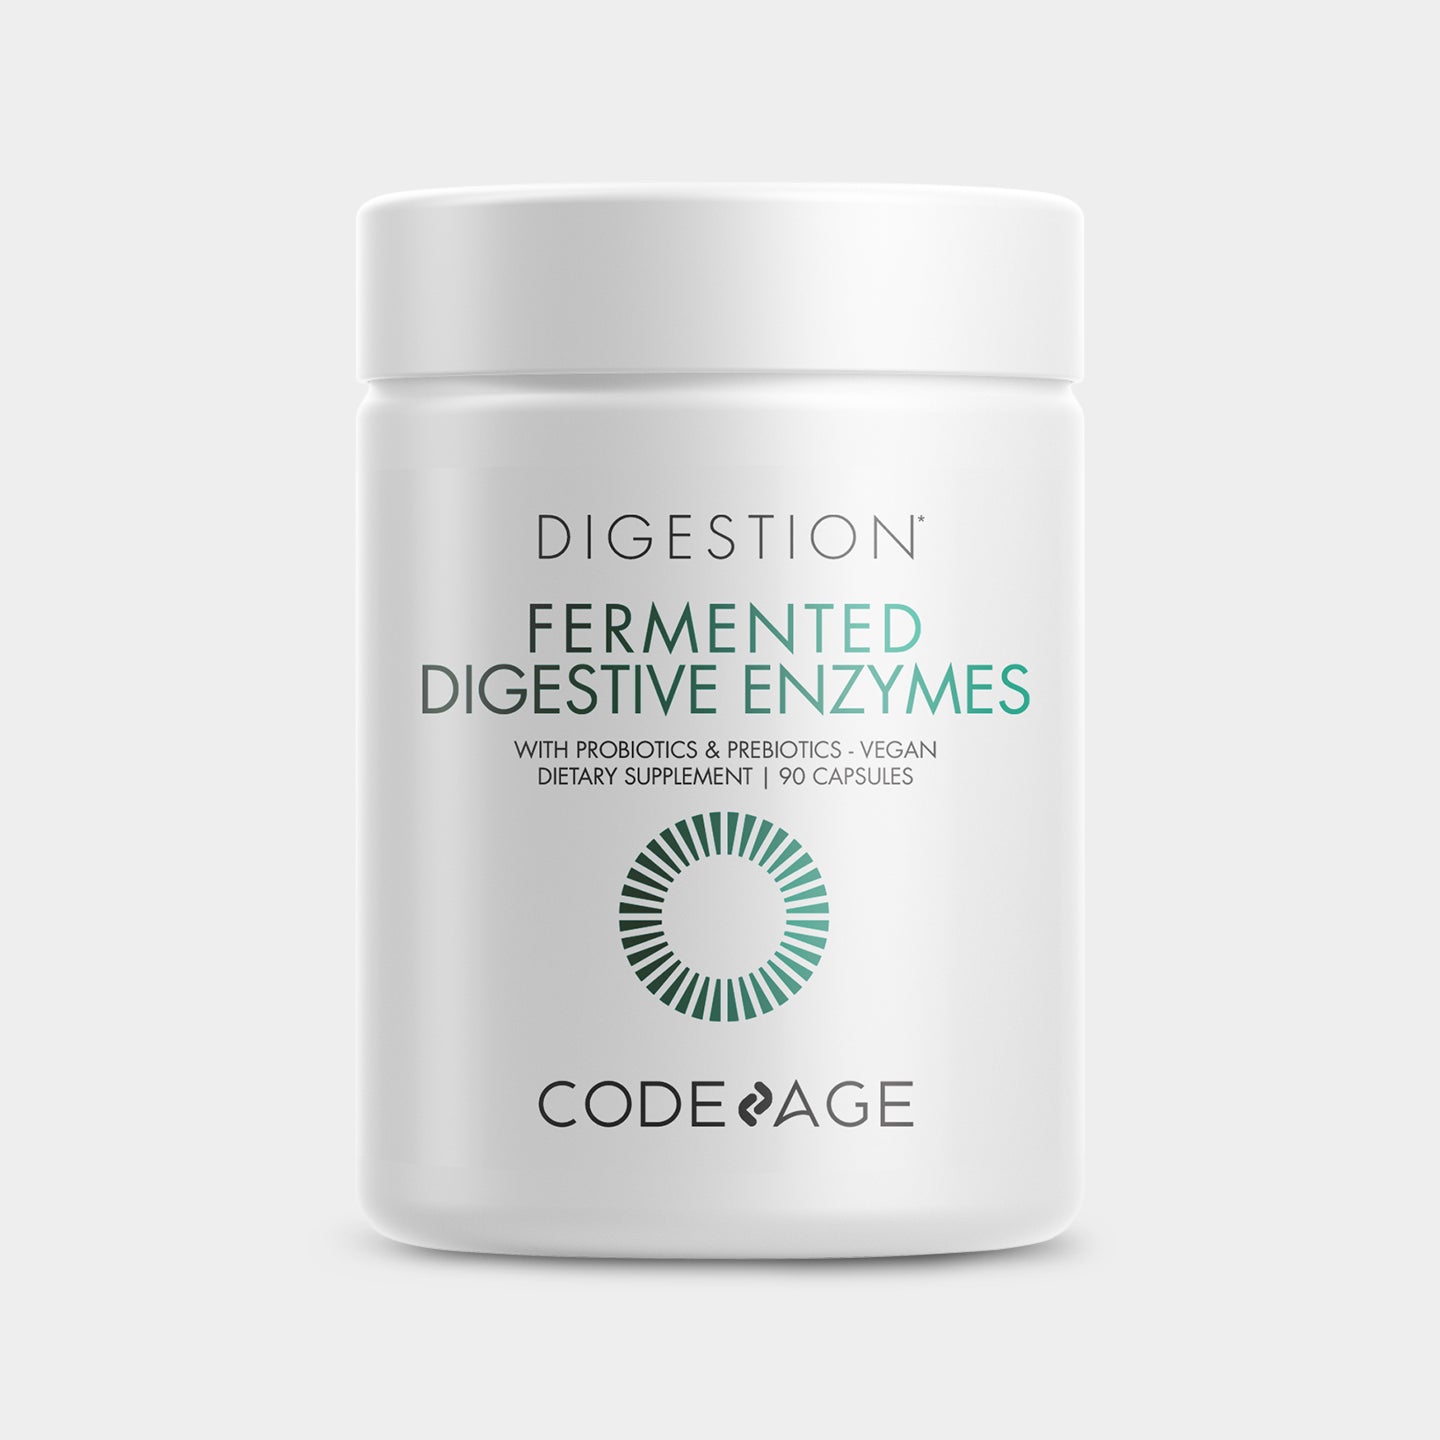 Codeage Digestion Fermented Digestive Enzymes Supplement Main